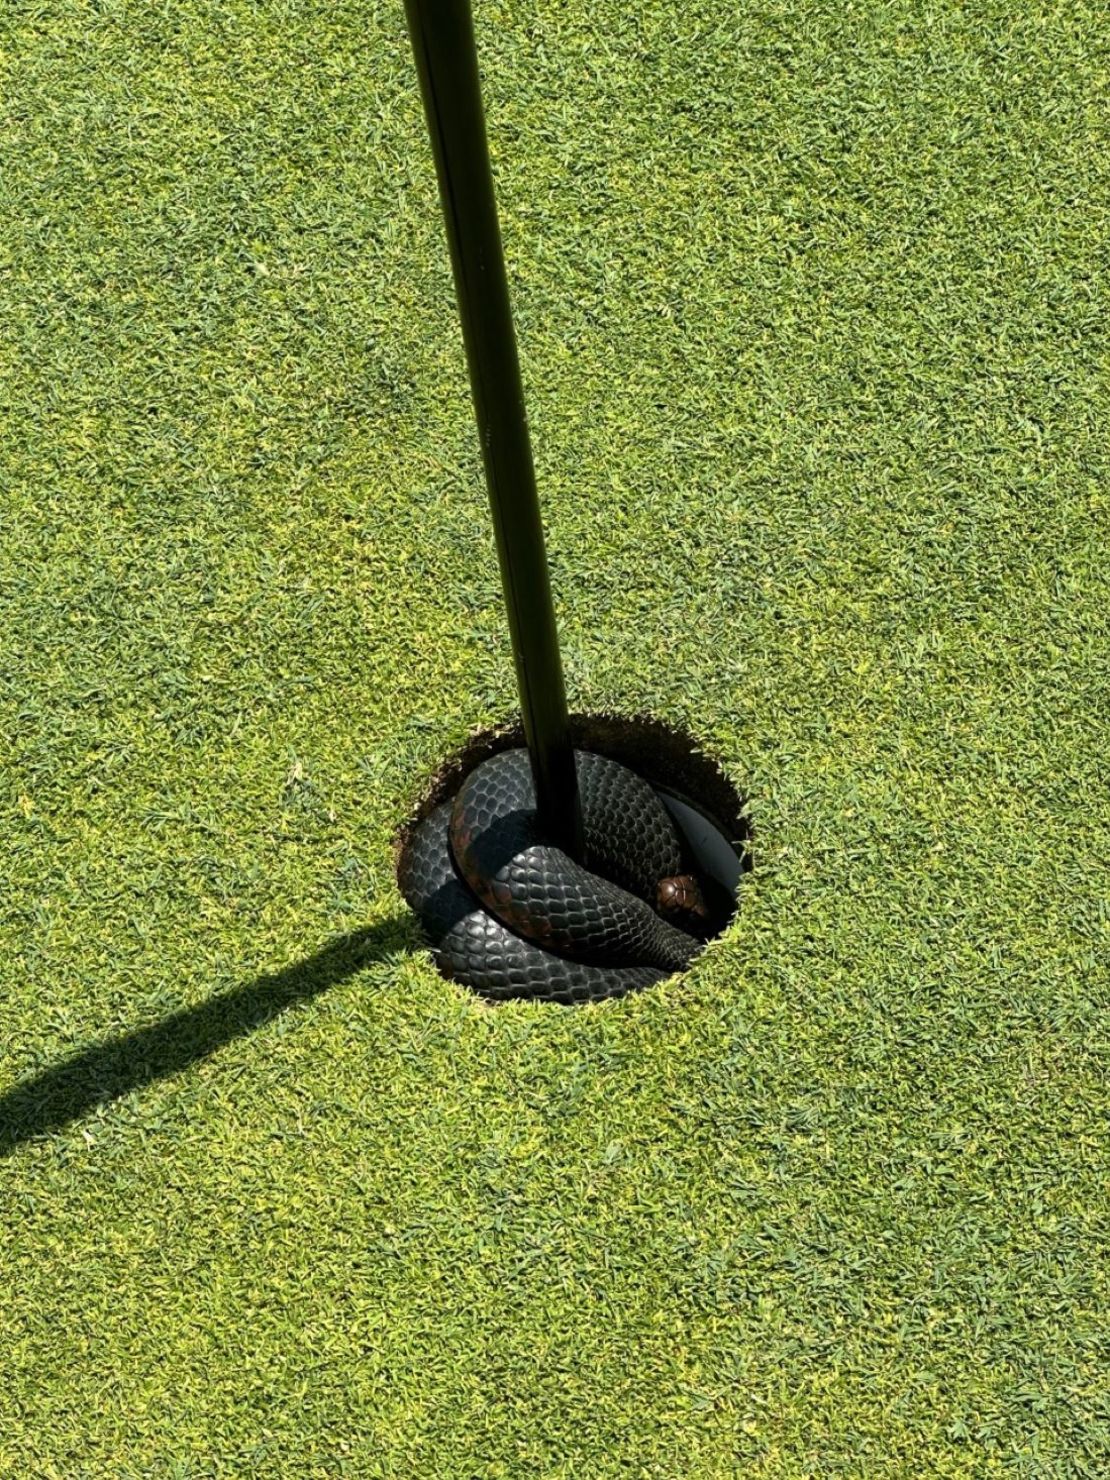 The red-bellied black snake found a cozy spot in the cup.